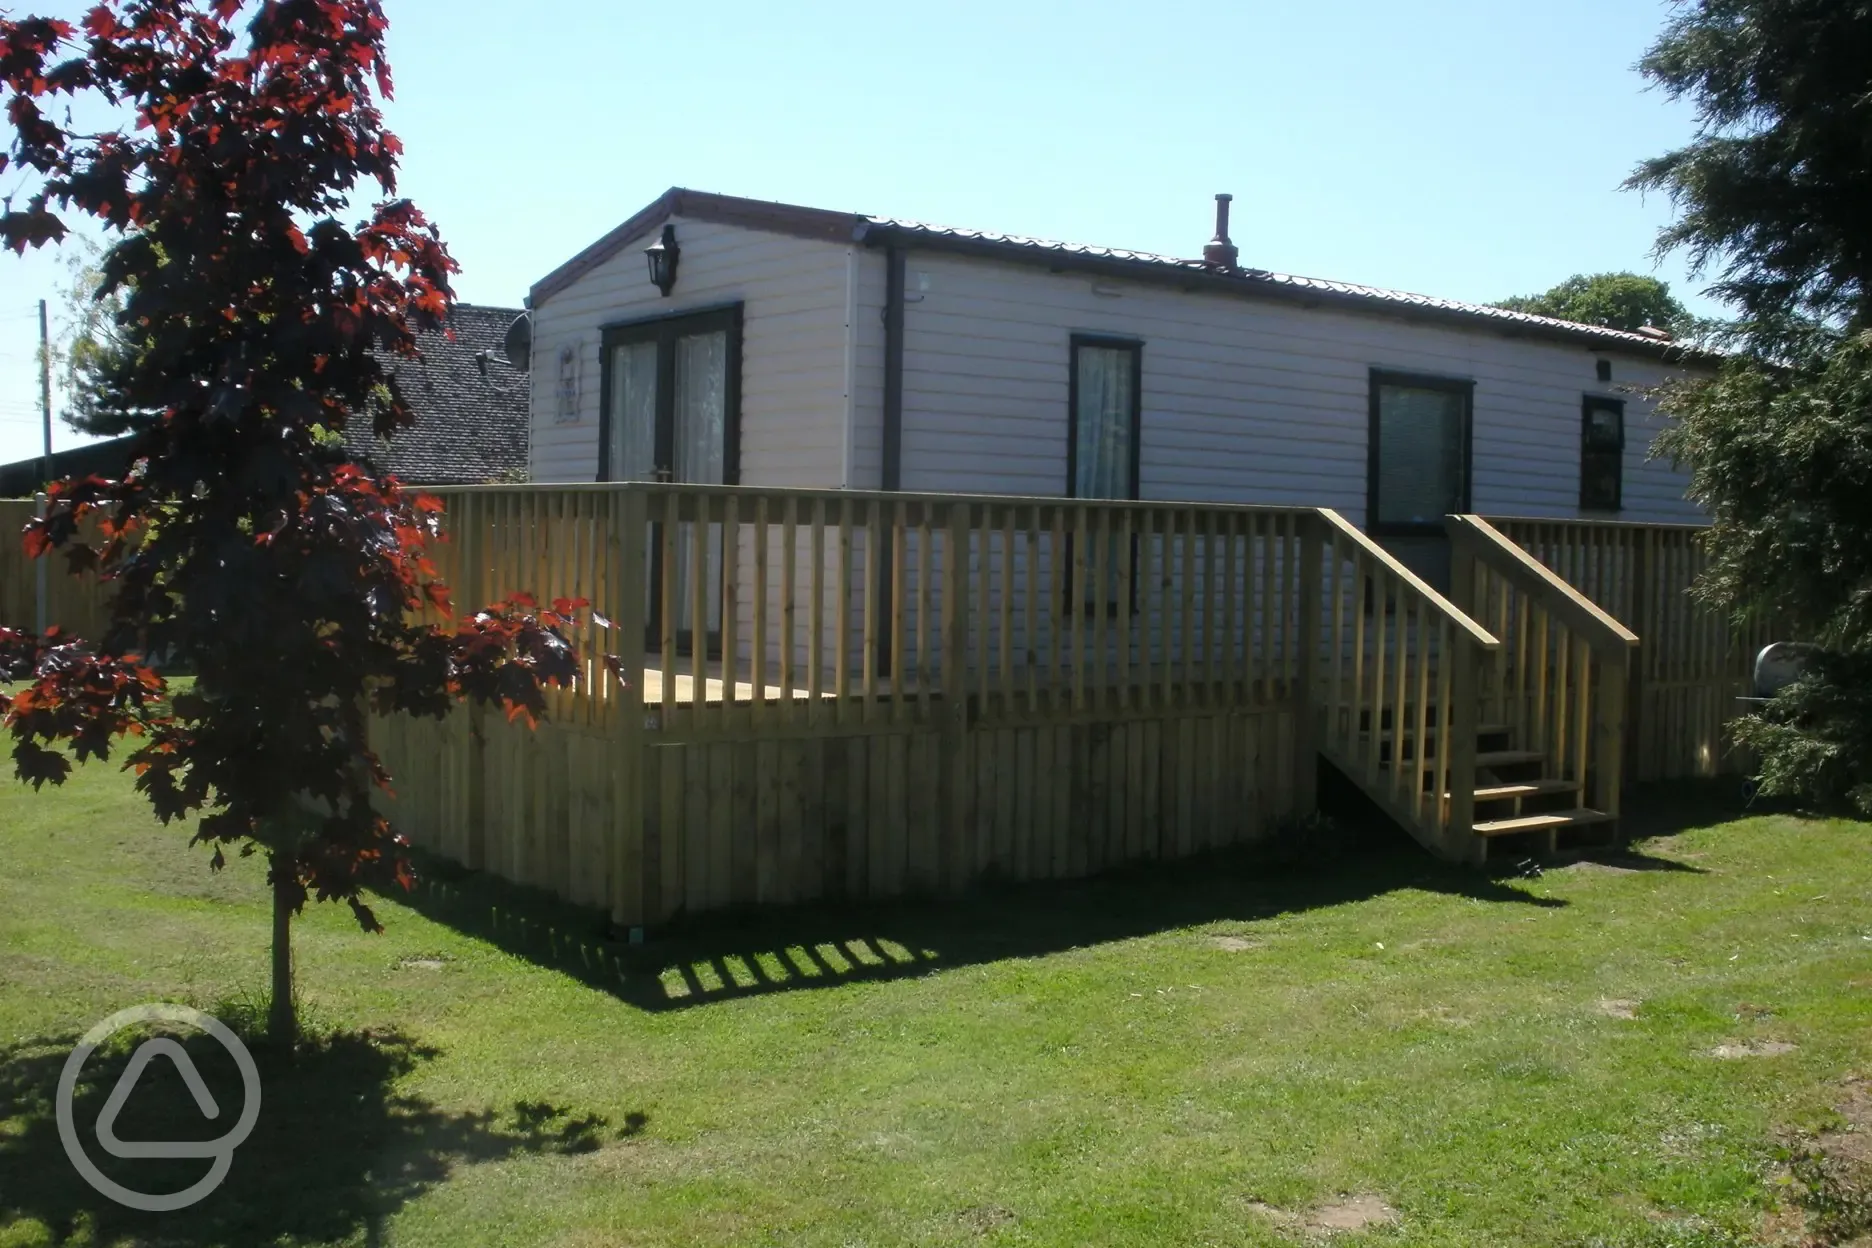 The on site holiday lodge